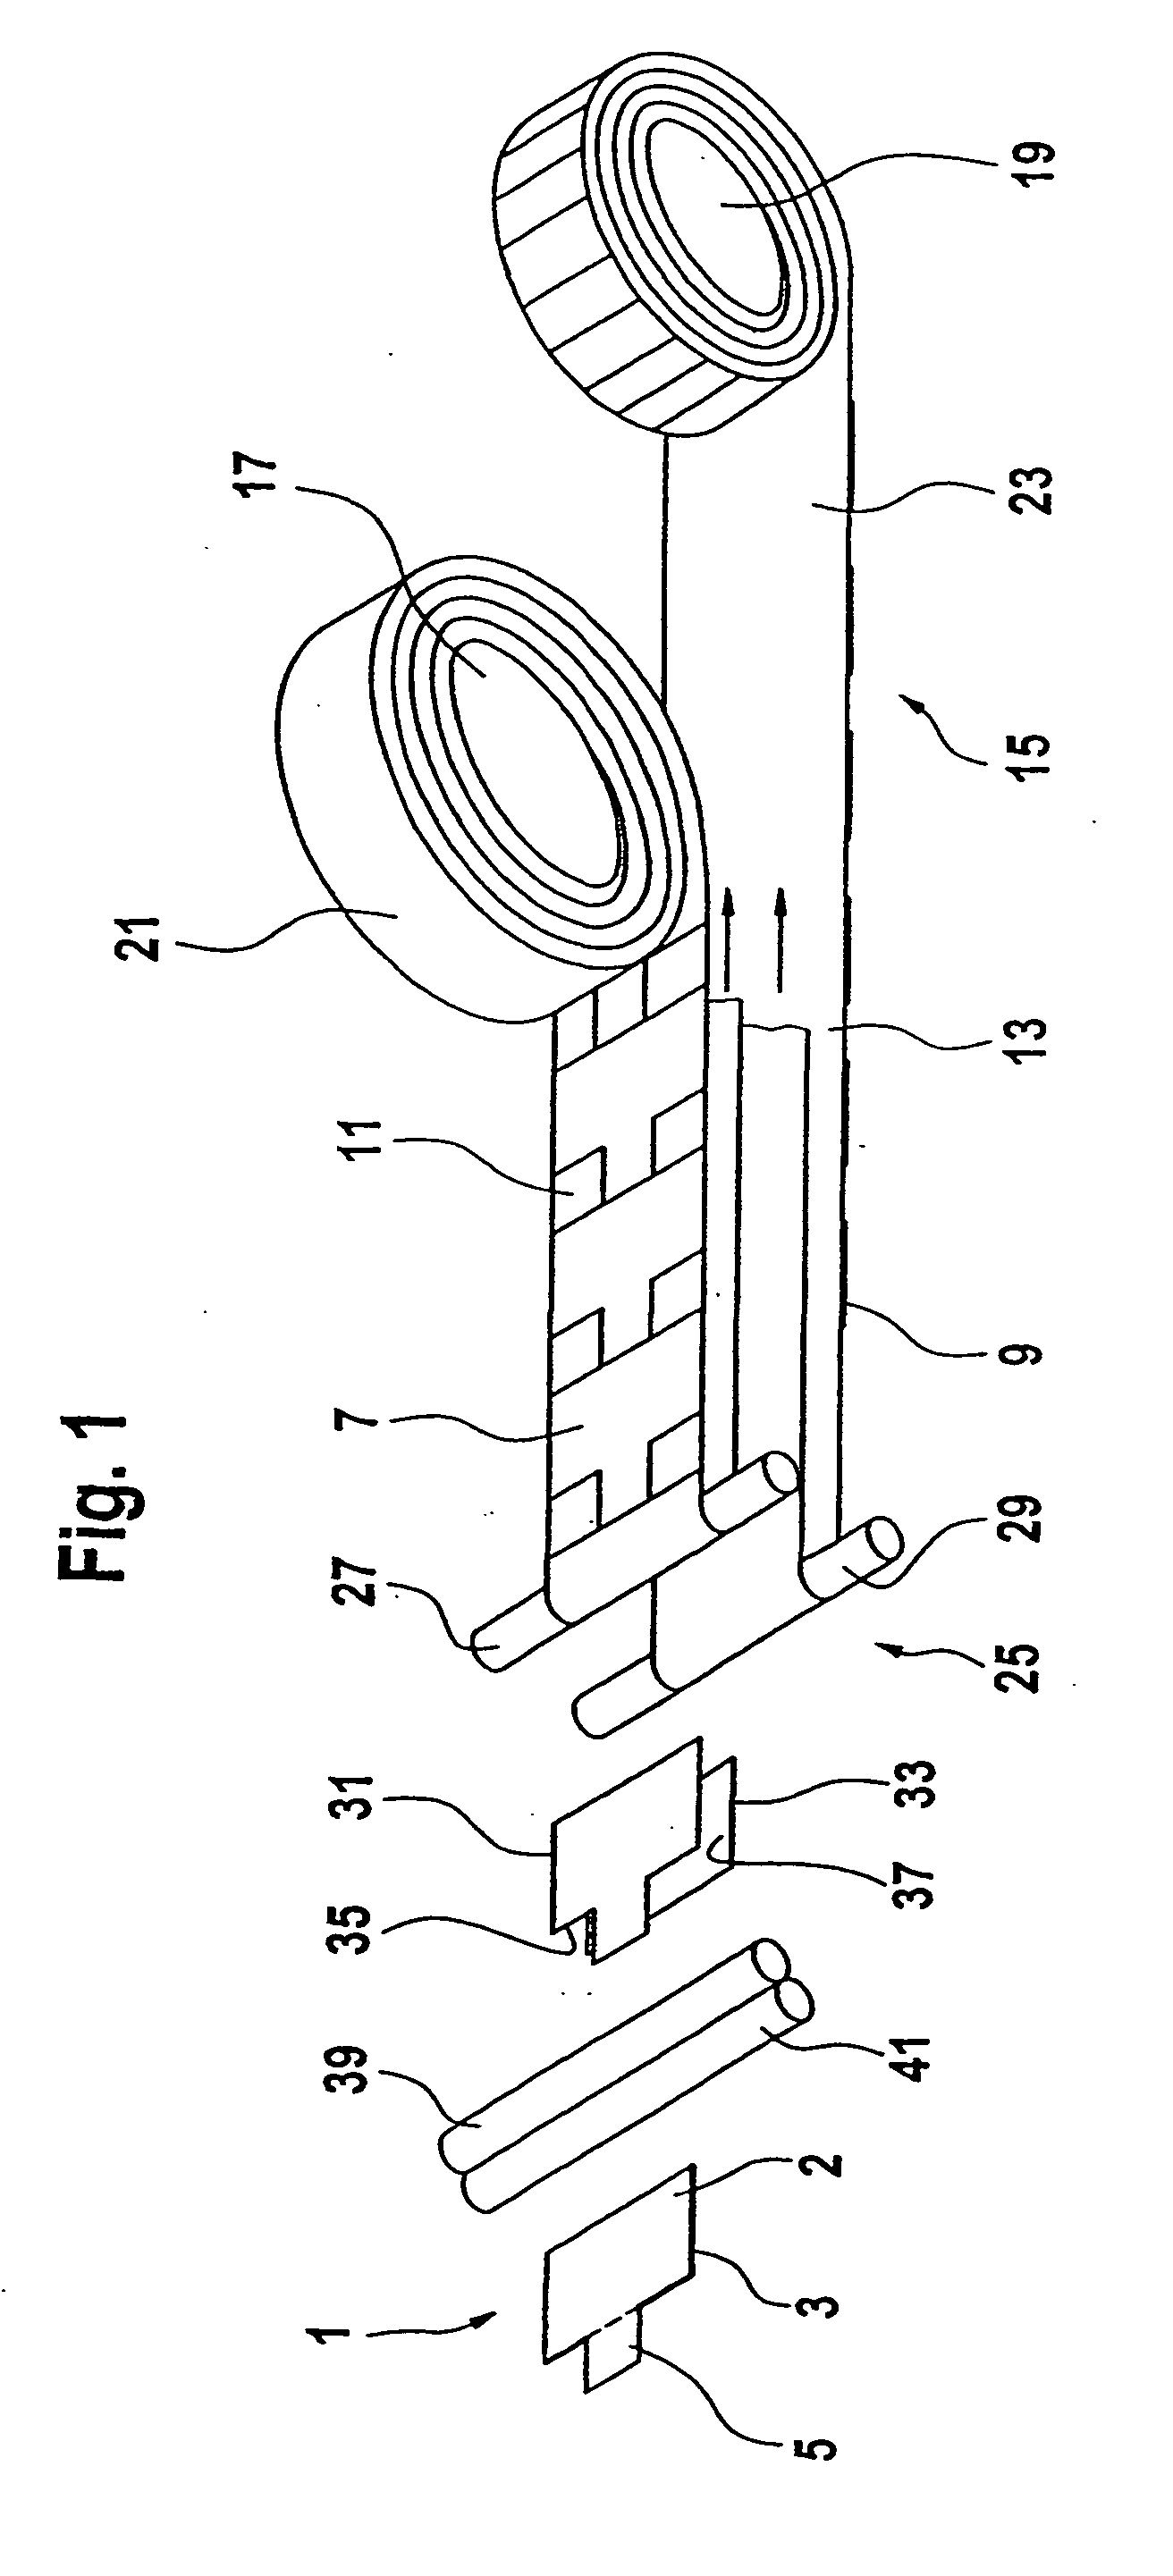 Method and device for producing double labels and corresponding double label